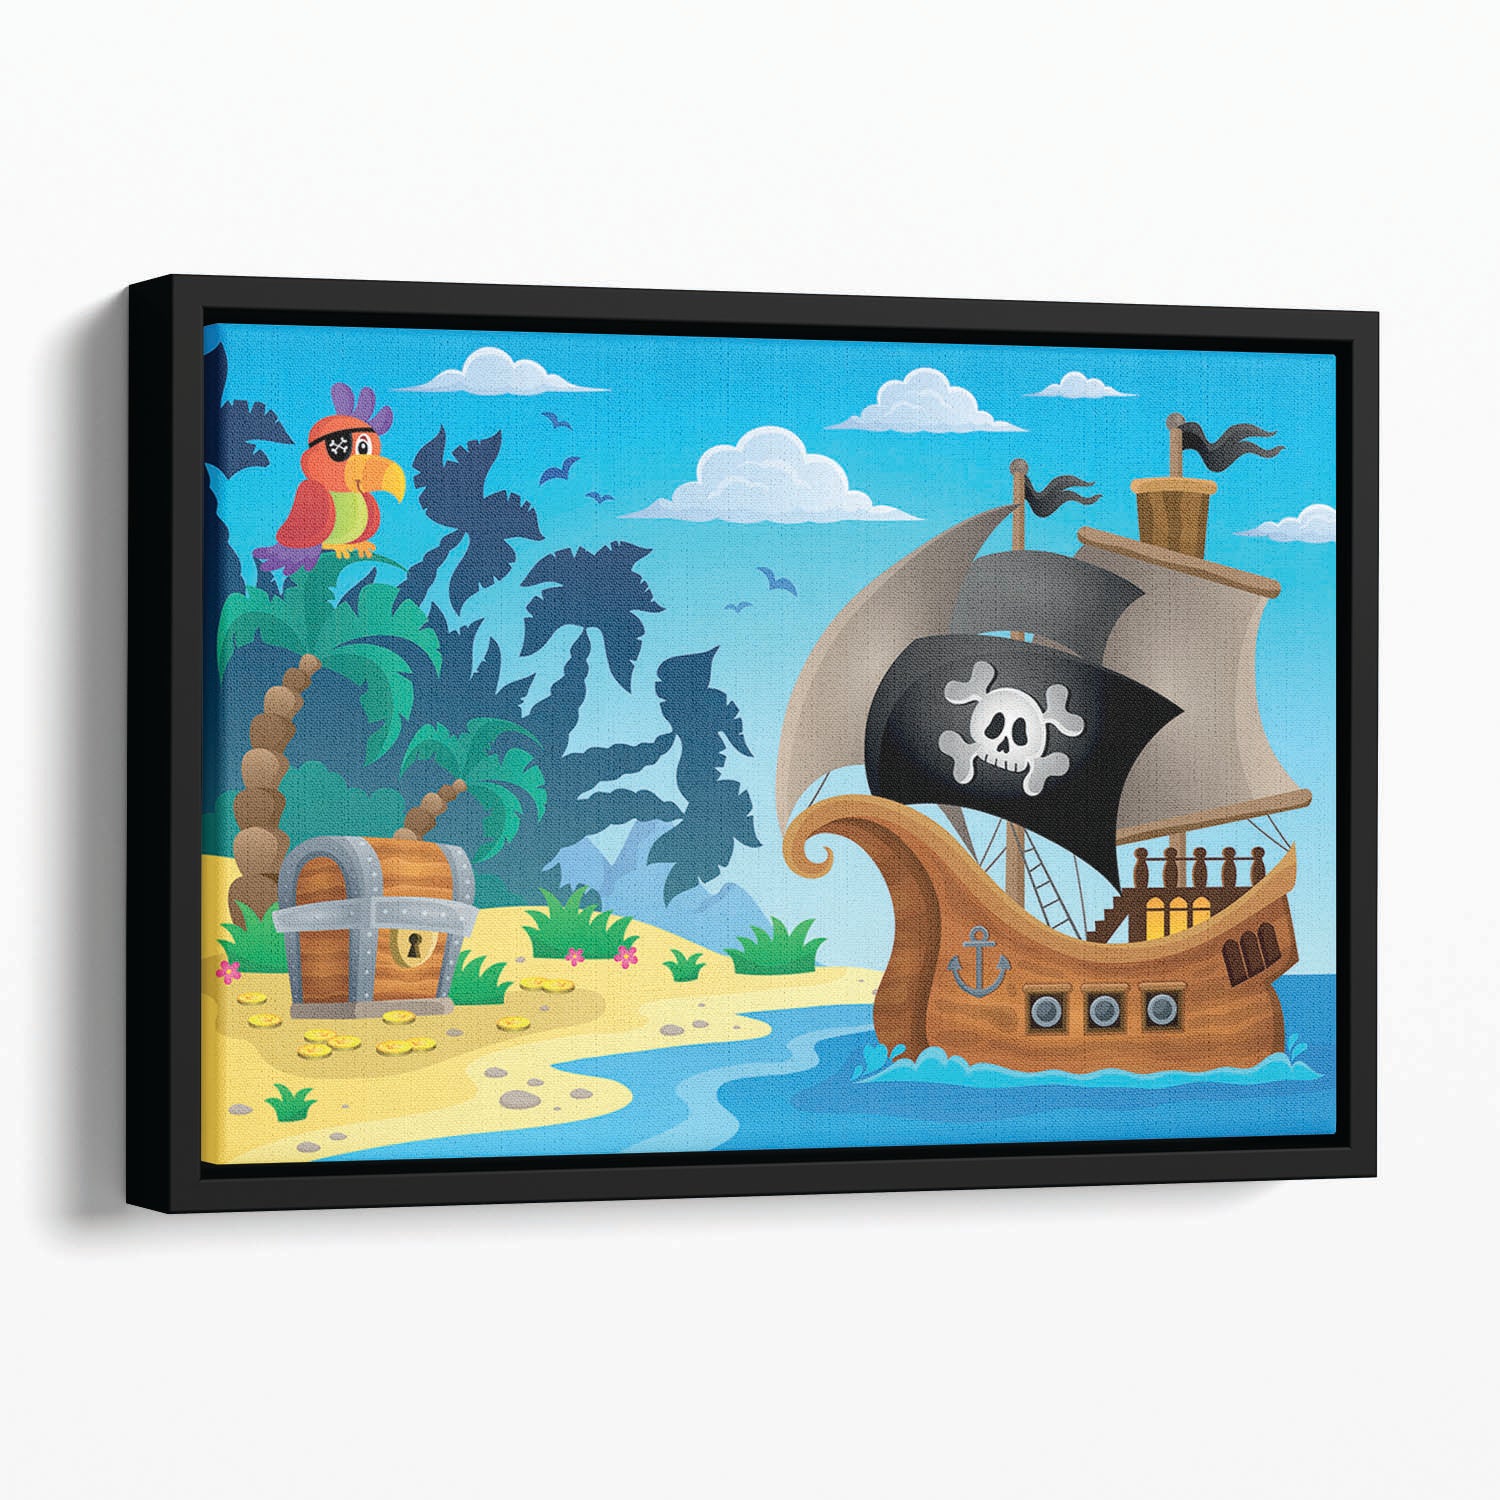 Pirate ship topic image 5 Floating Framed Canvas